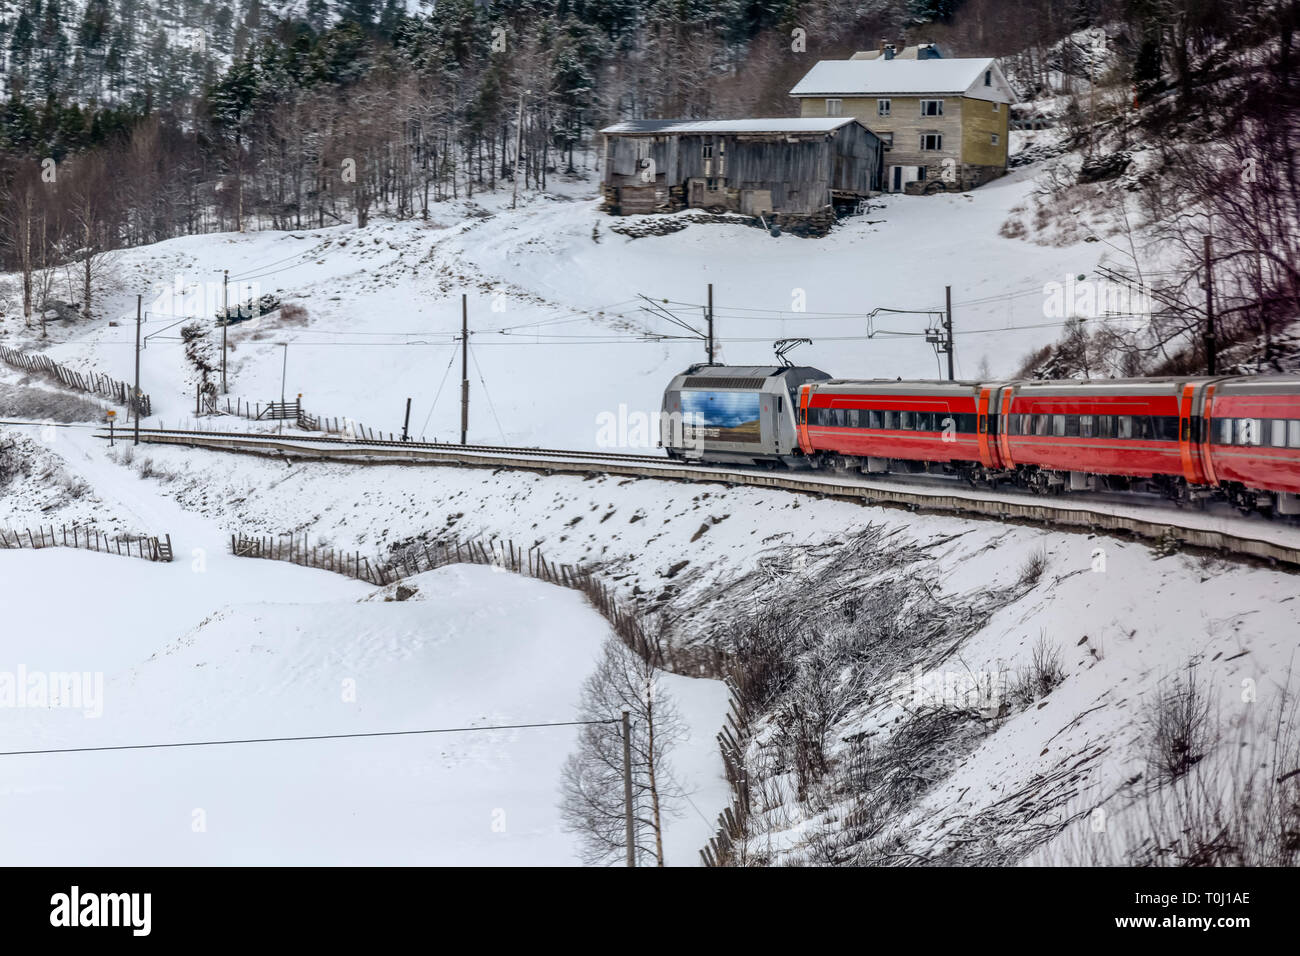 The train journey from Oslo to Bergen in Norway is con sided on elf the finest railway journeys in Europe. This train pulling coaches during winter. Stock Photo